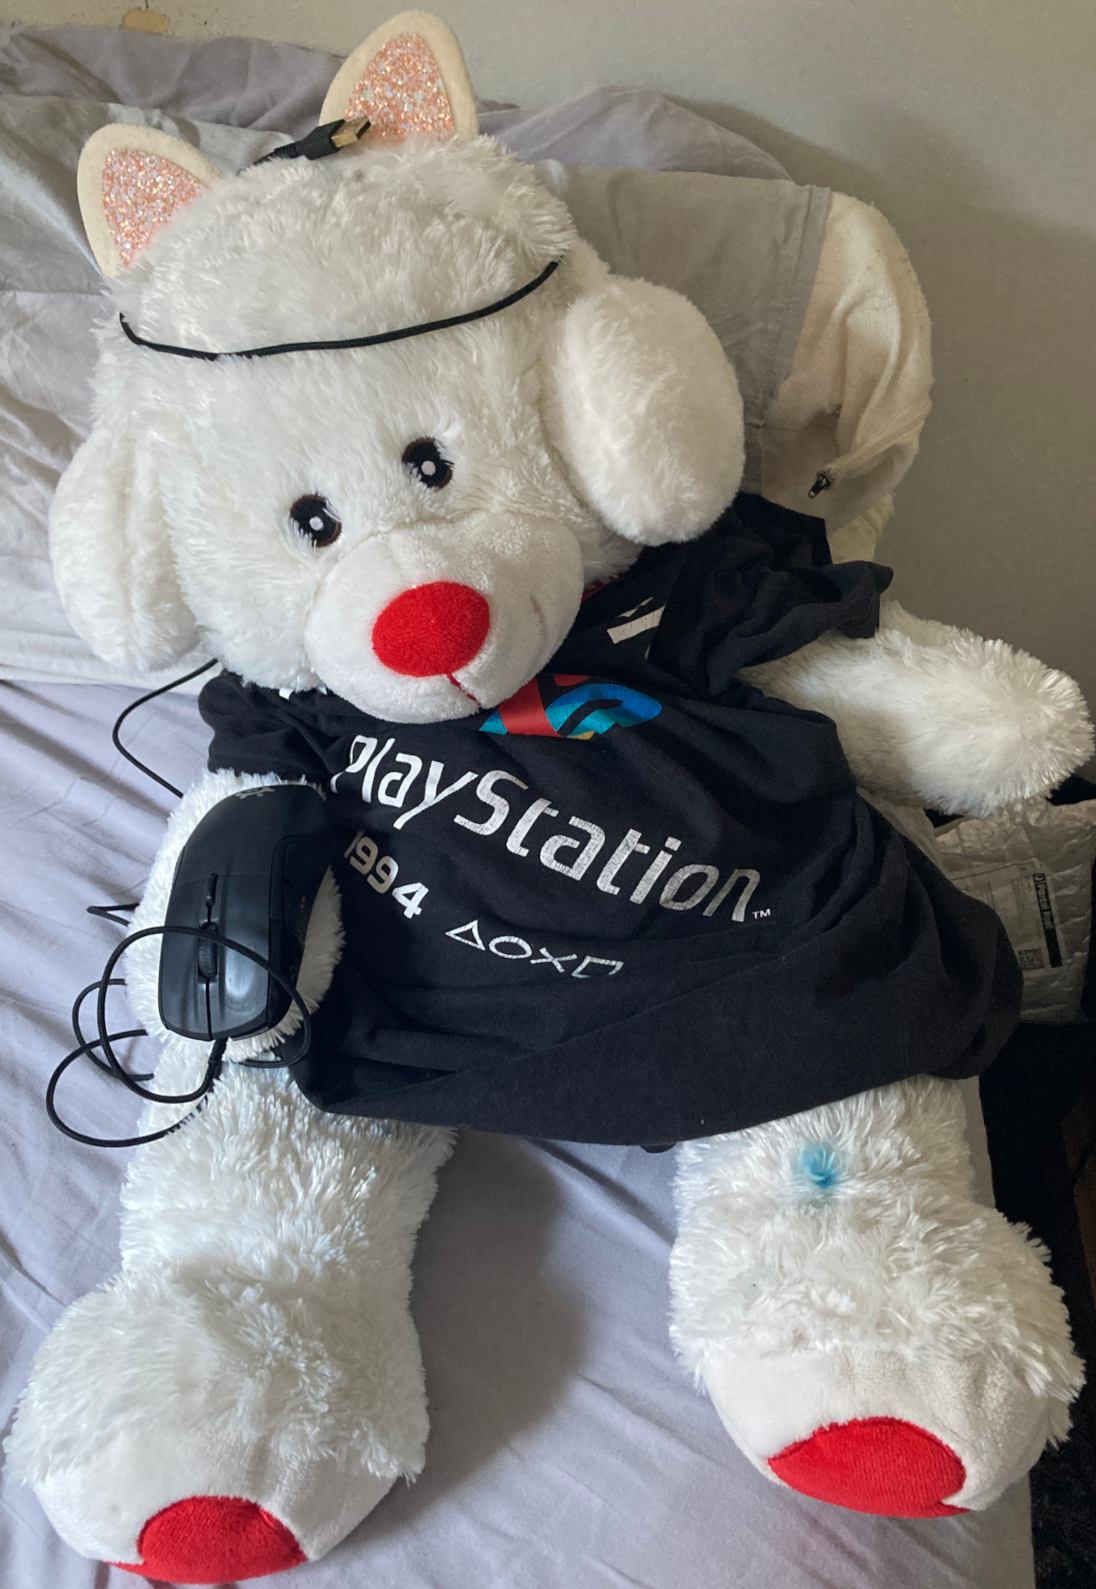 White teddybear wearing black playstation t-shirt, white cat earmuffs, holding computer mouse.